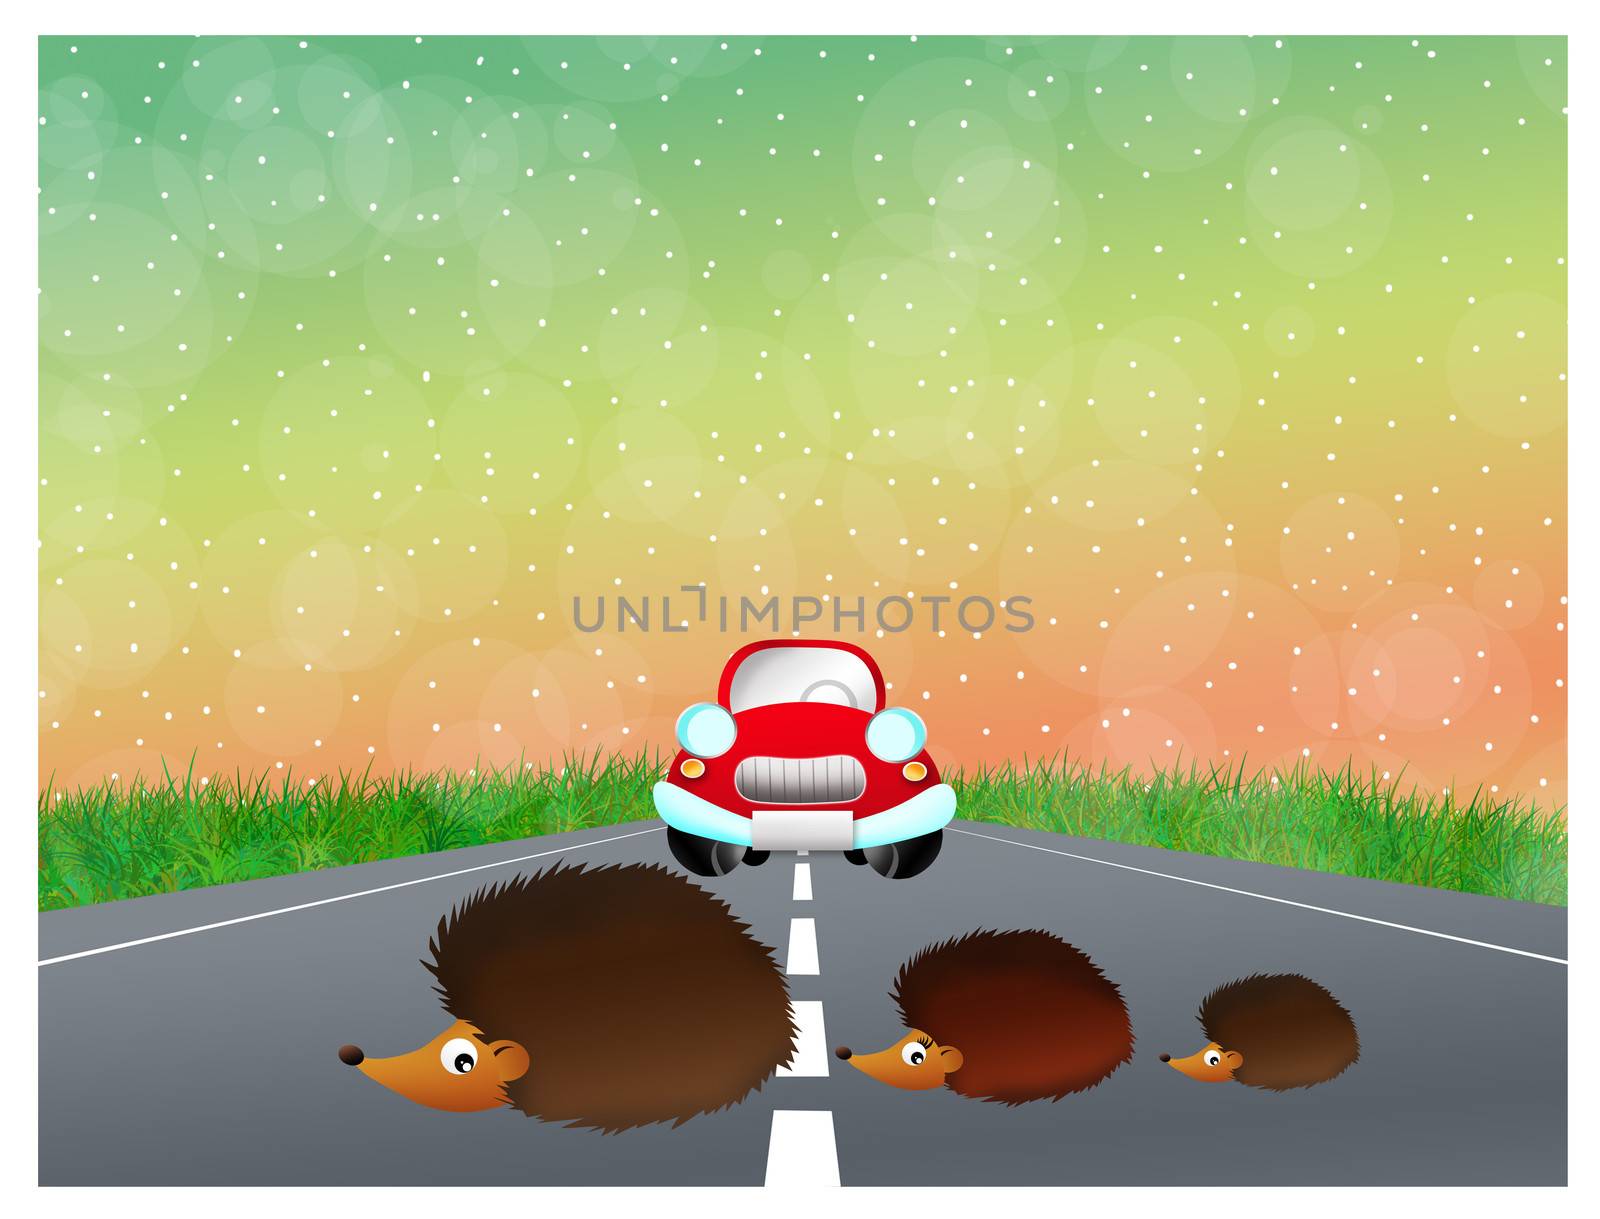 Family of hedgehogs by adrenalina